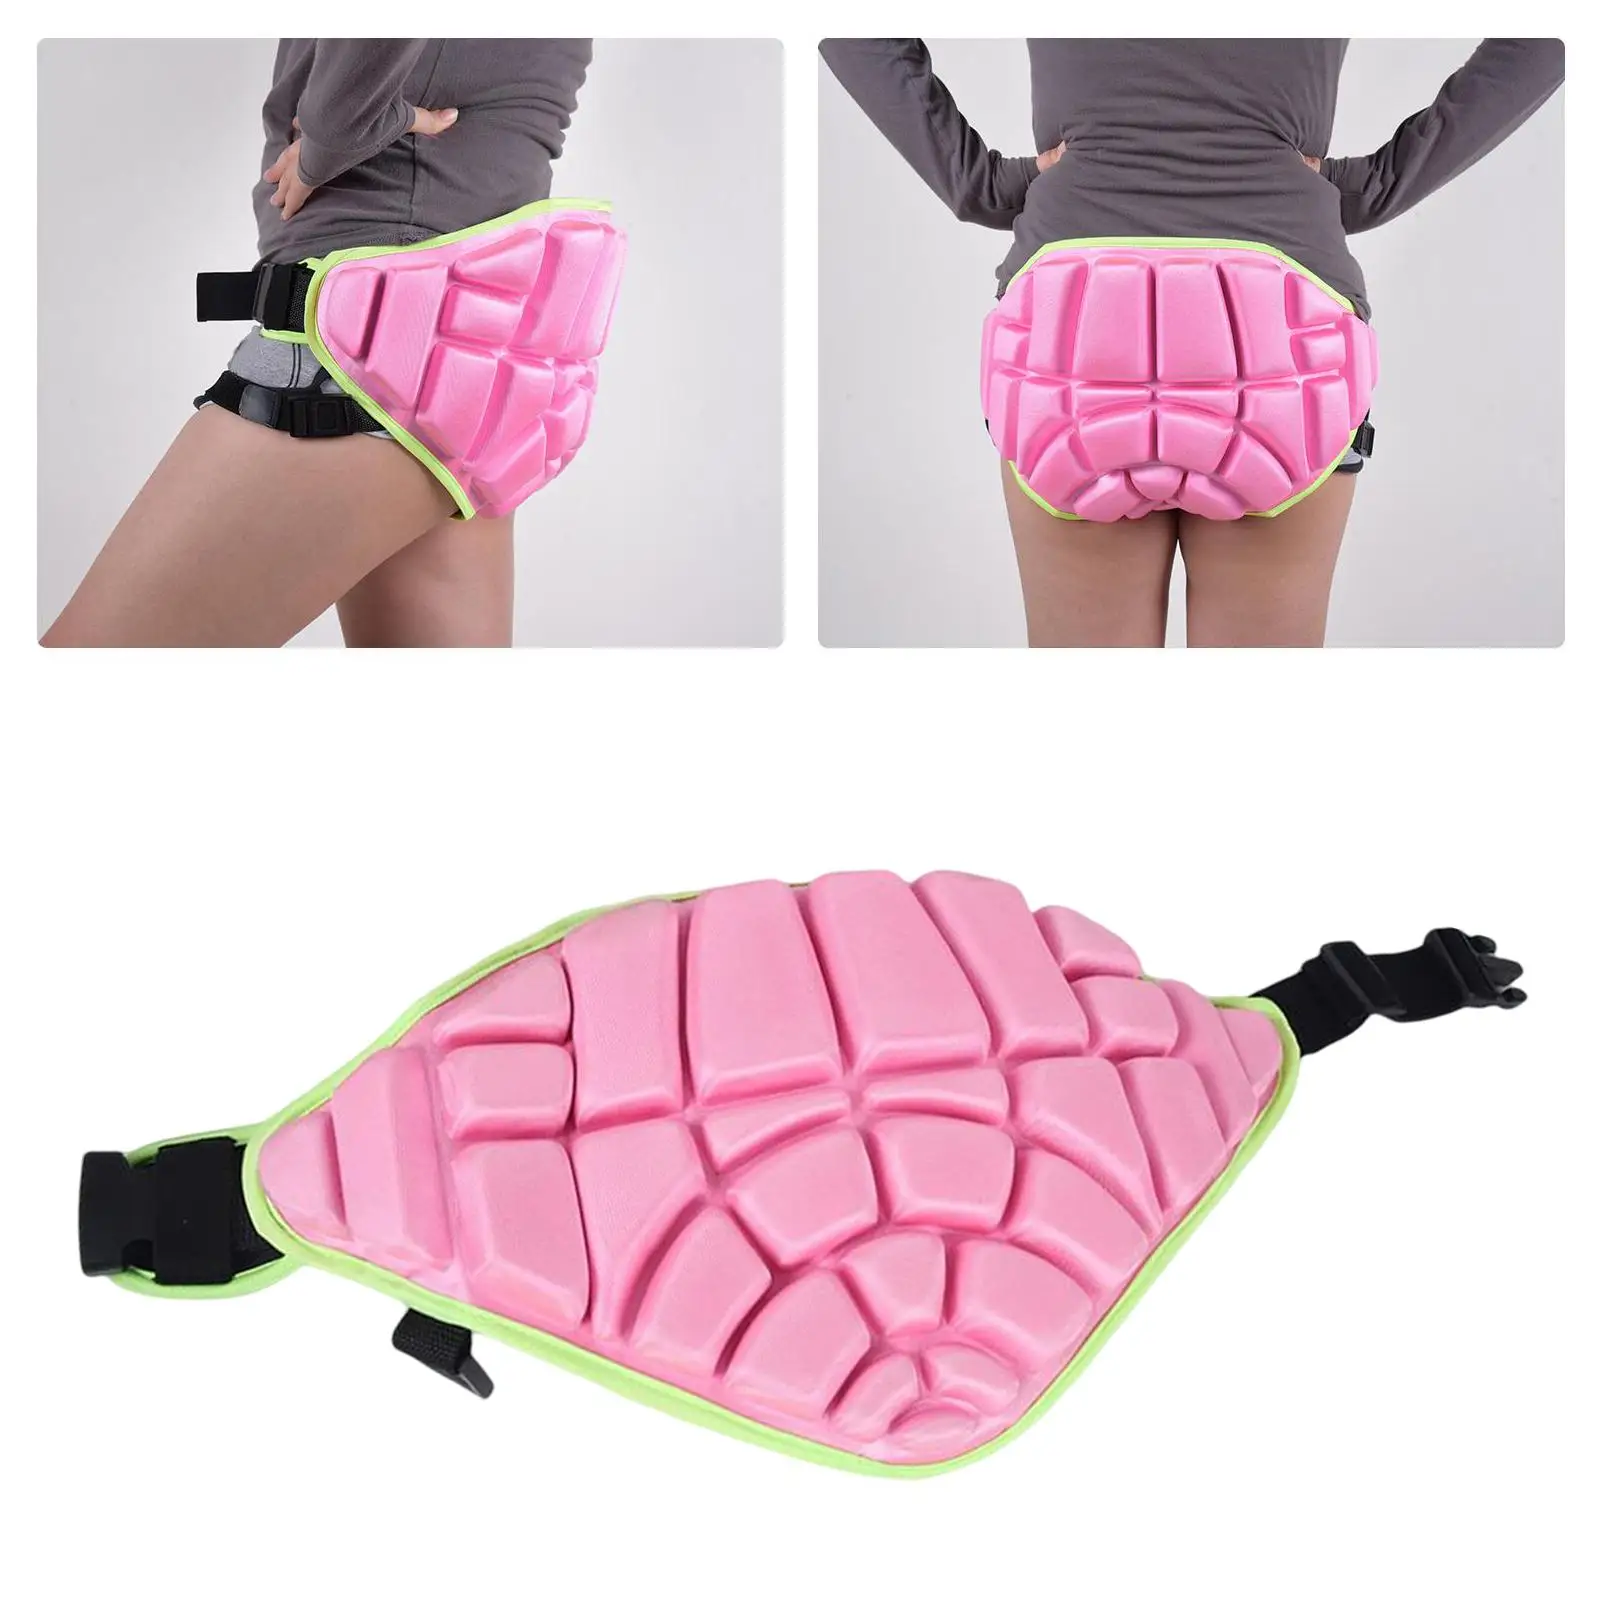 Soft Adult/Kids Butt Hip Pad Anti Slip Full Protection Lightweight Hip Butt Guard with Buckle Butt Pad for Skateboarding Ski